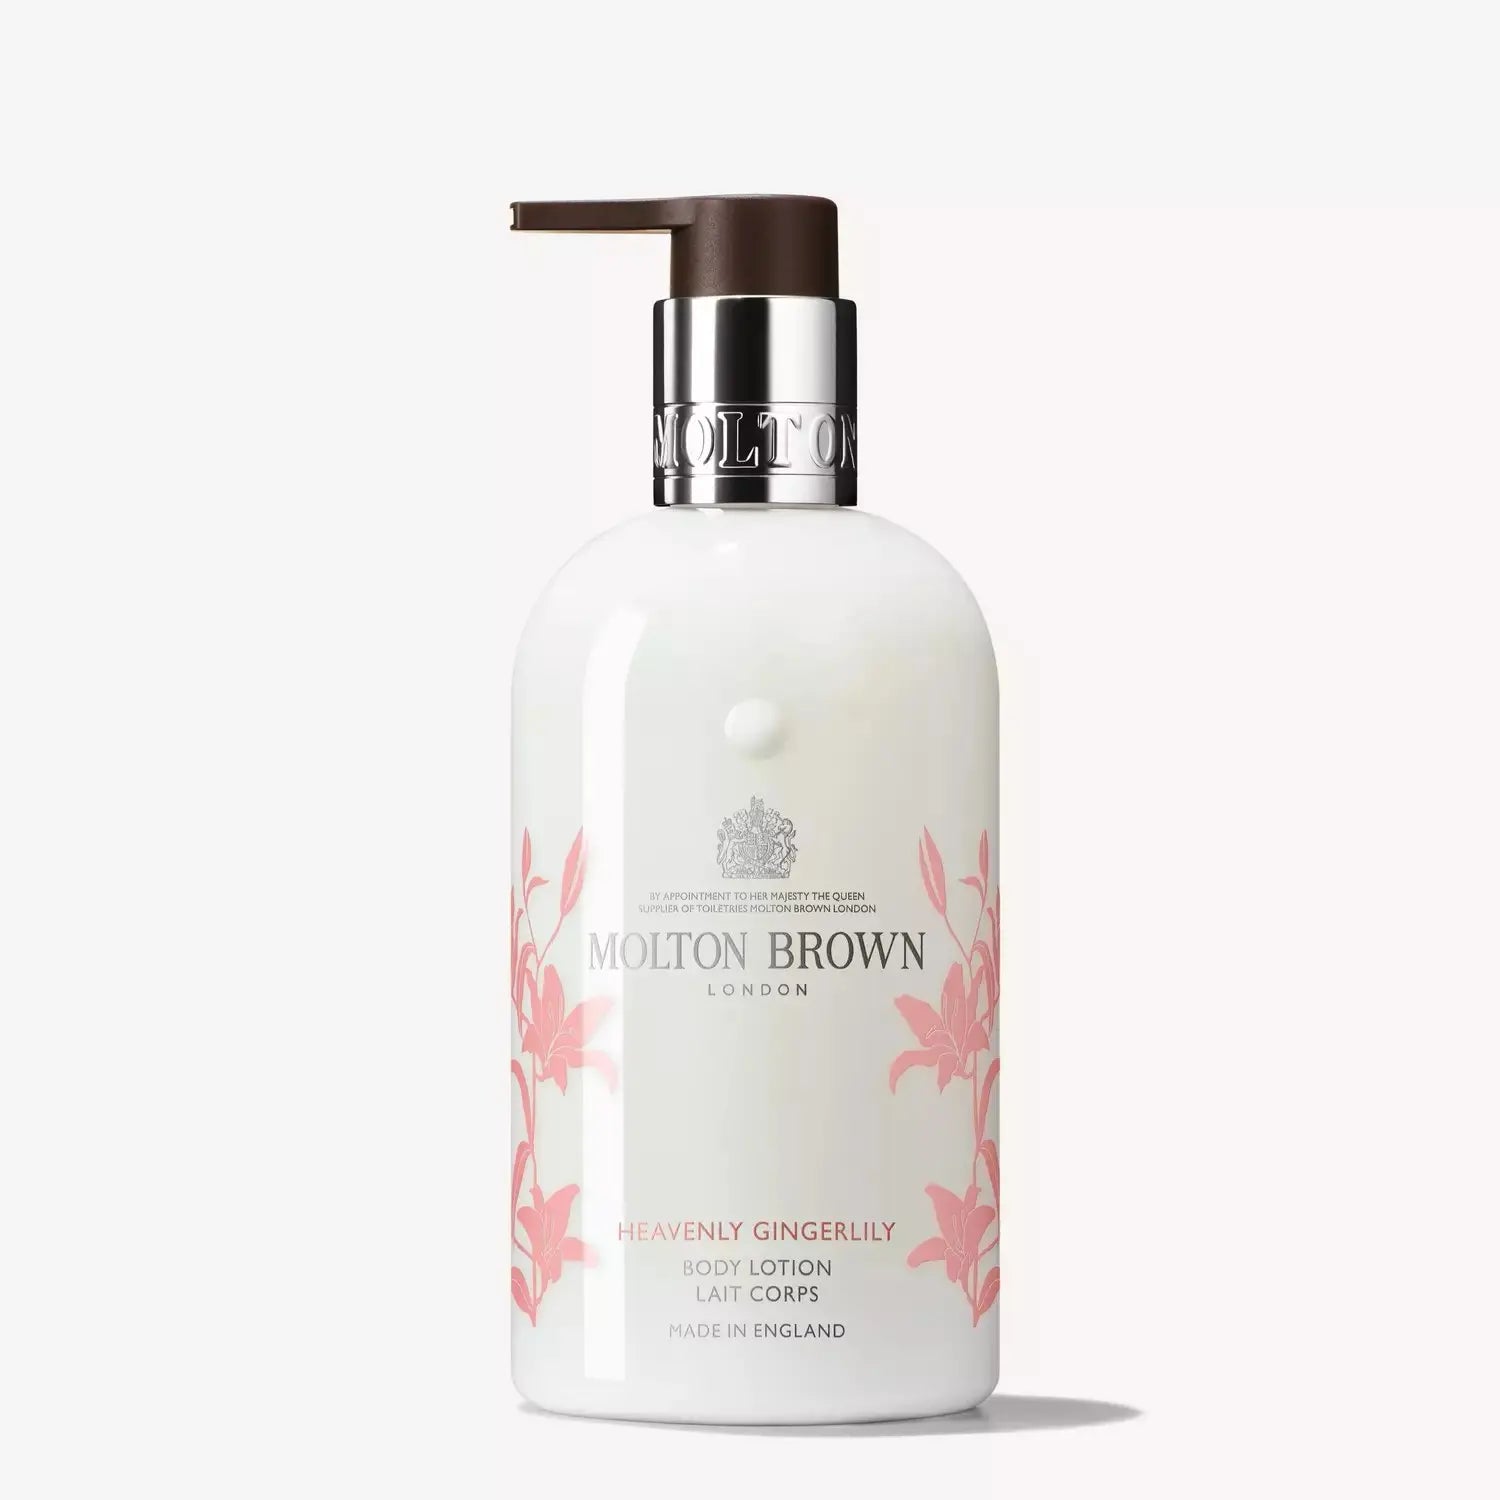 Molton Brown Heavenly Gingerlily Body Lotion 